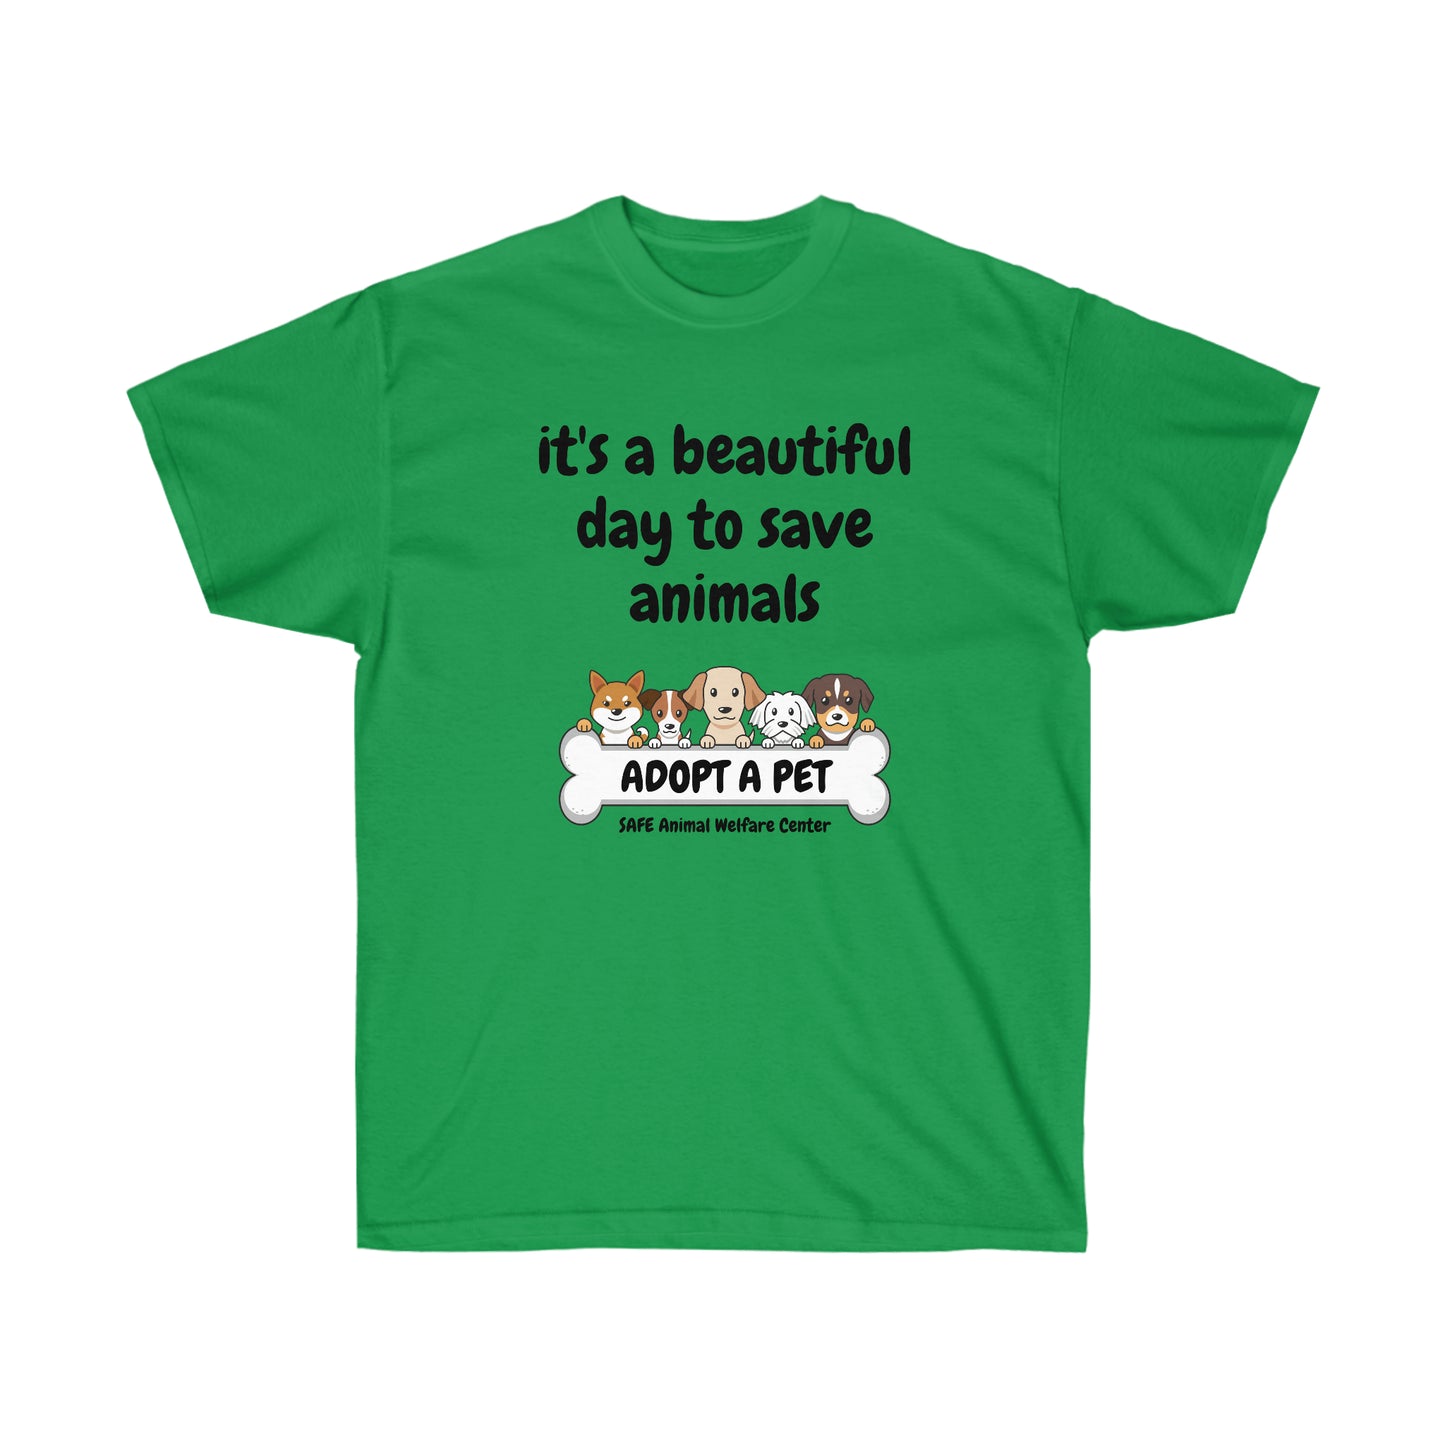 It's a beautiful day to save animals Unisex Ultra Cotton Tee